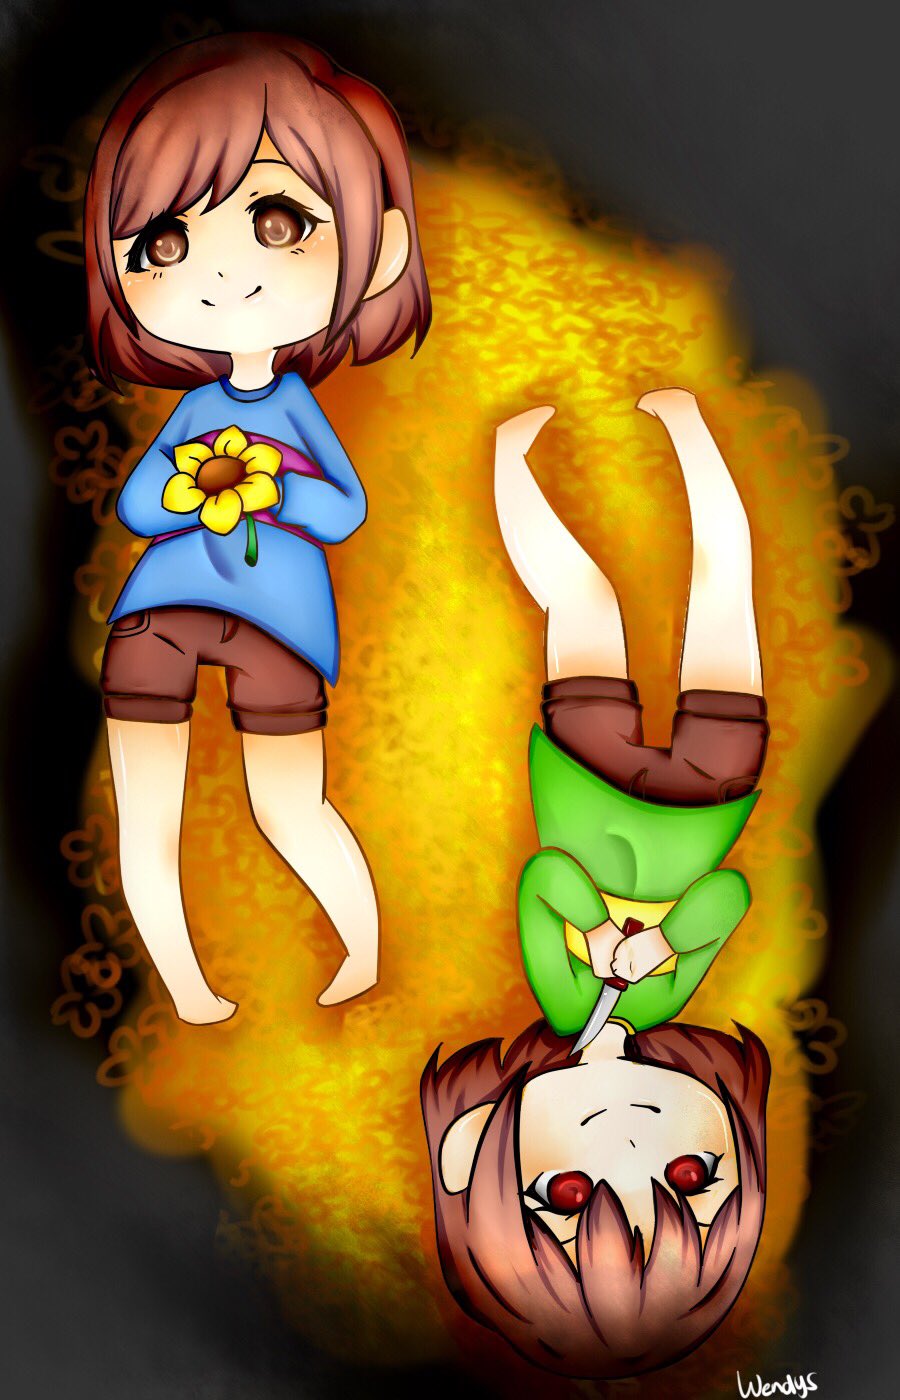 Wendys Chara And Frisk Fanart Please Do Not Repost And Also Do Not Trace My Work Hashtags Undertale Chara Frisk Charaandfrisk Friskandchara Friskfanart Charafanart Undertalefanart T Co R69xixu1rc Twitter